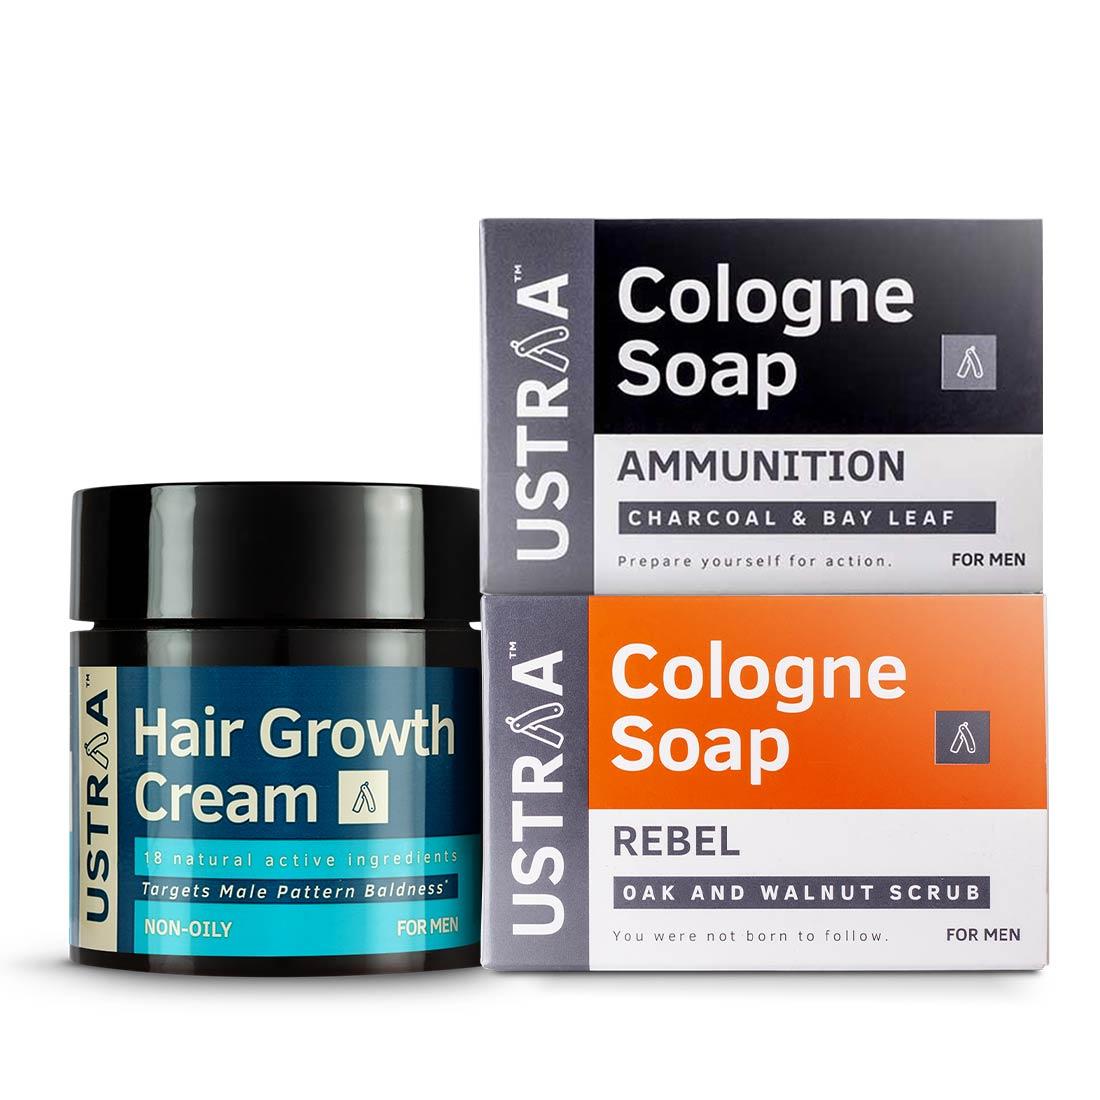 Hair Growth Cream and 2 Ustraa Cologne Soaps